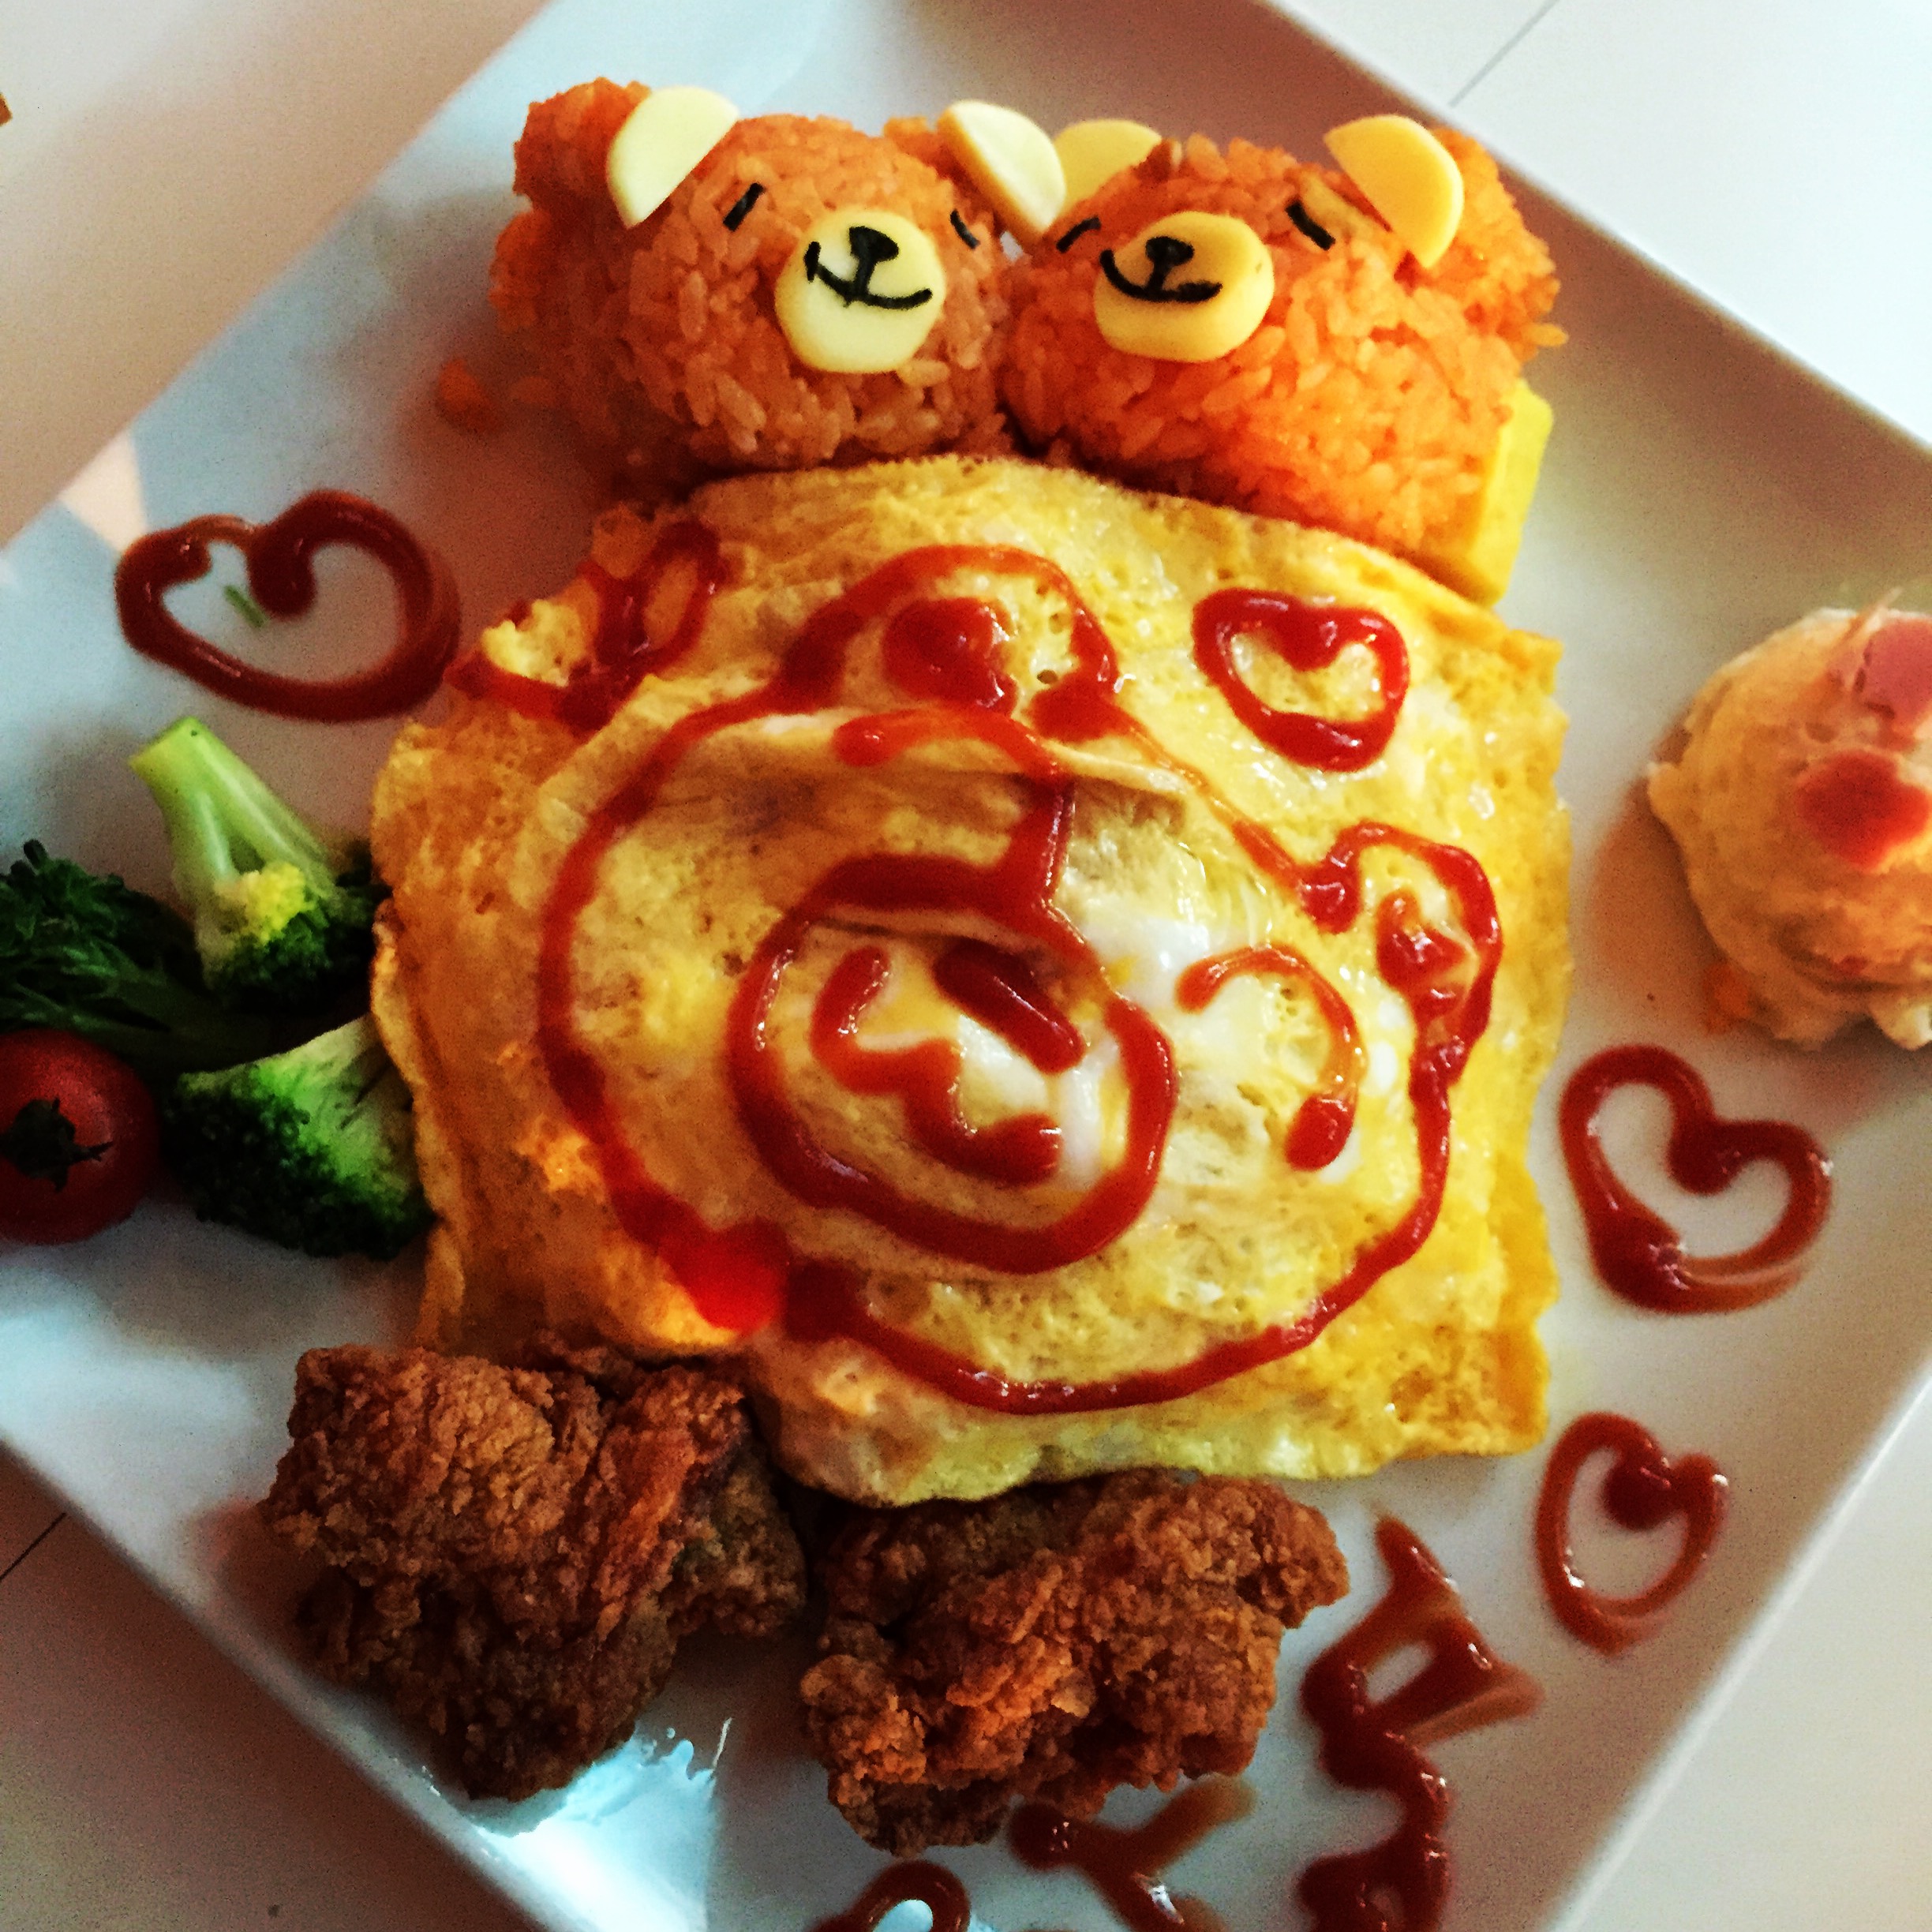 a plate of food with a bear made of food